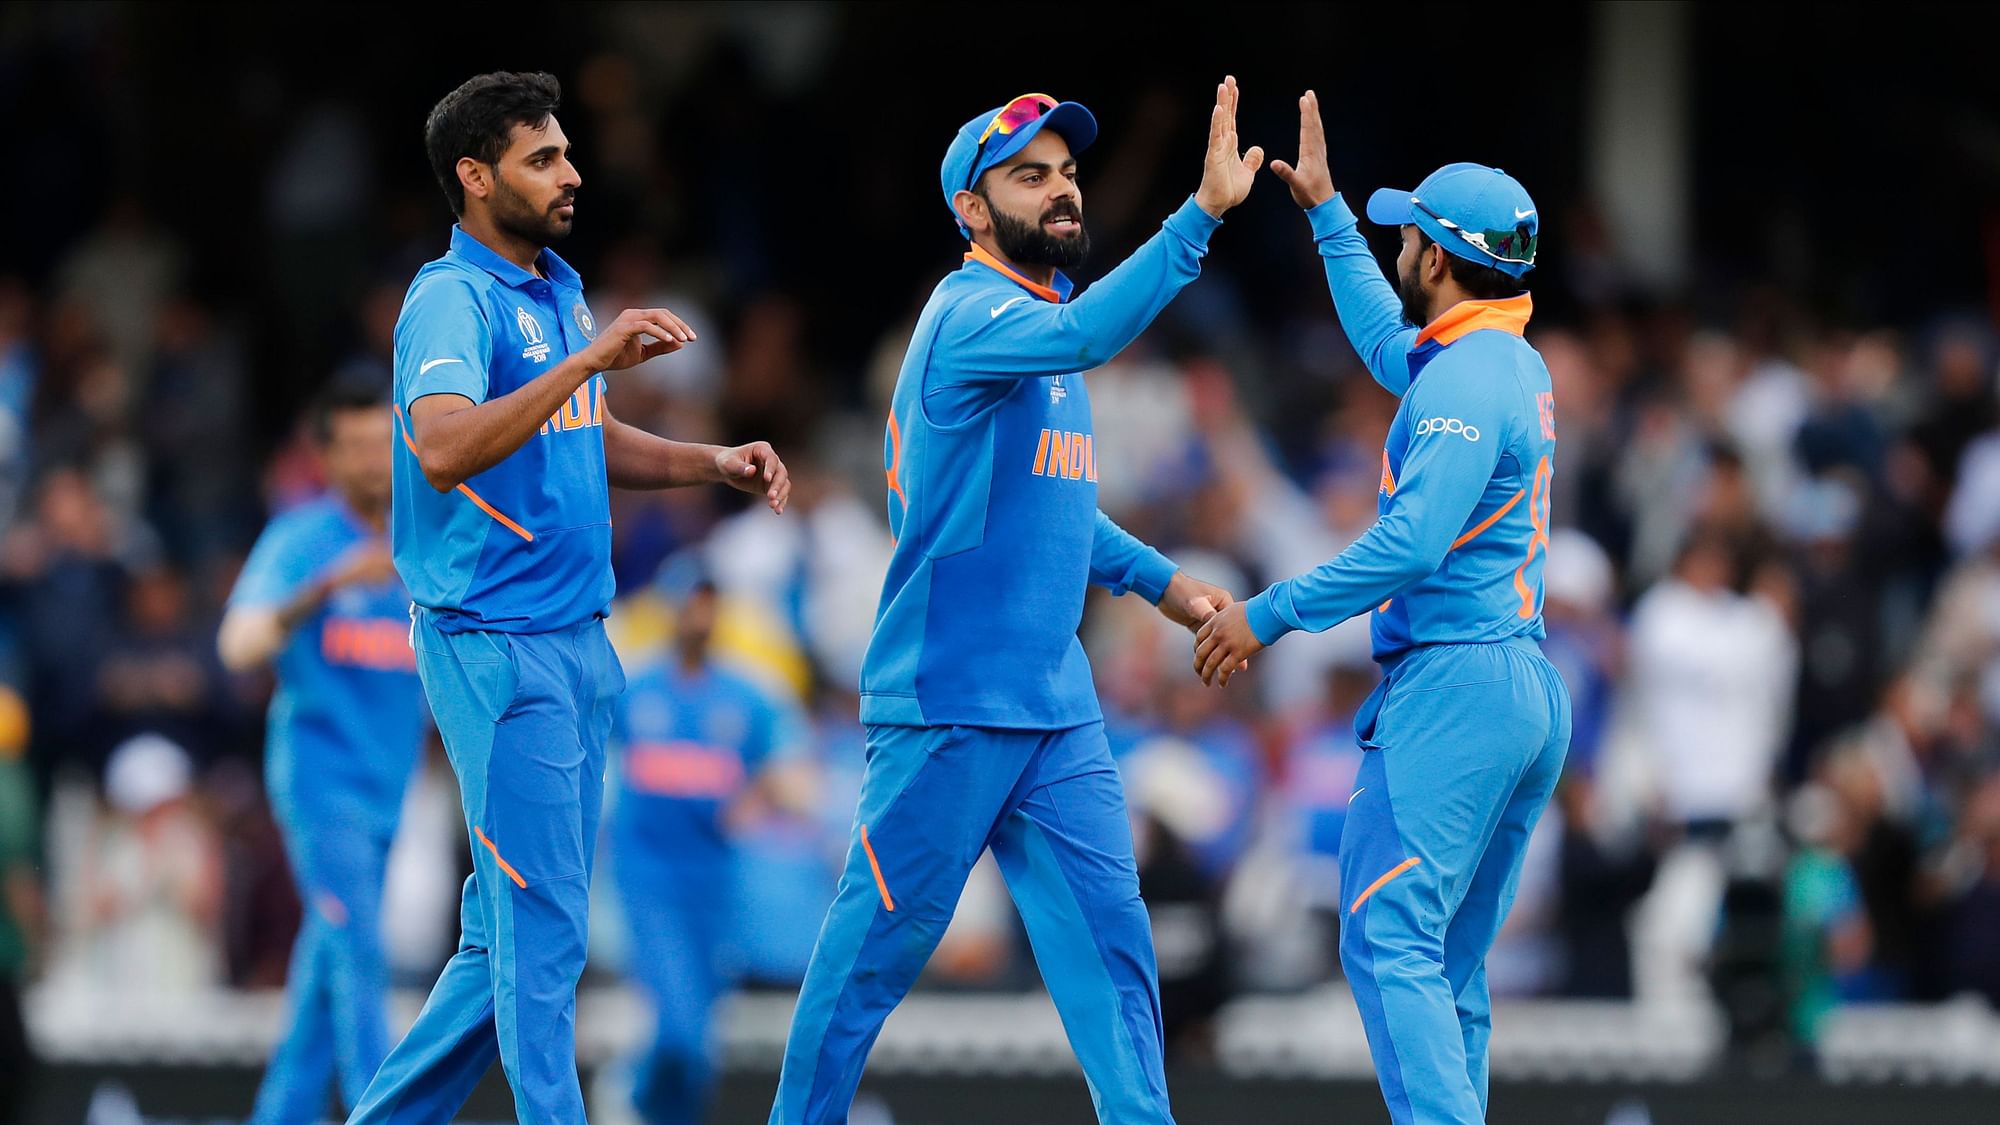 The Indian team celebrates after winning the World Cup match against Australia.